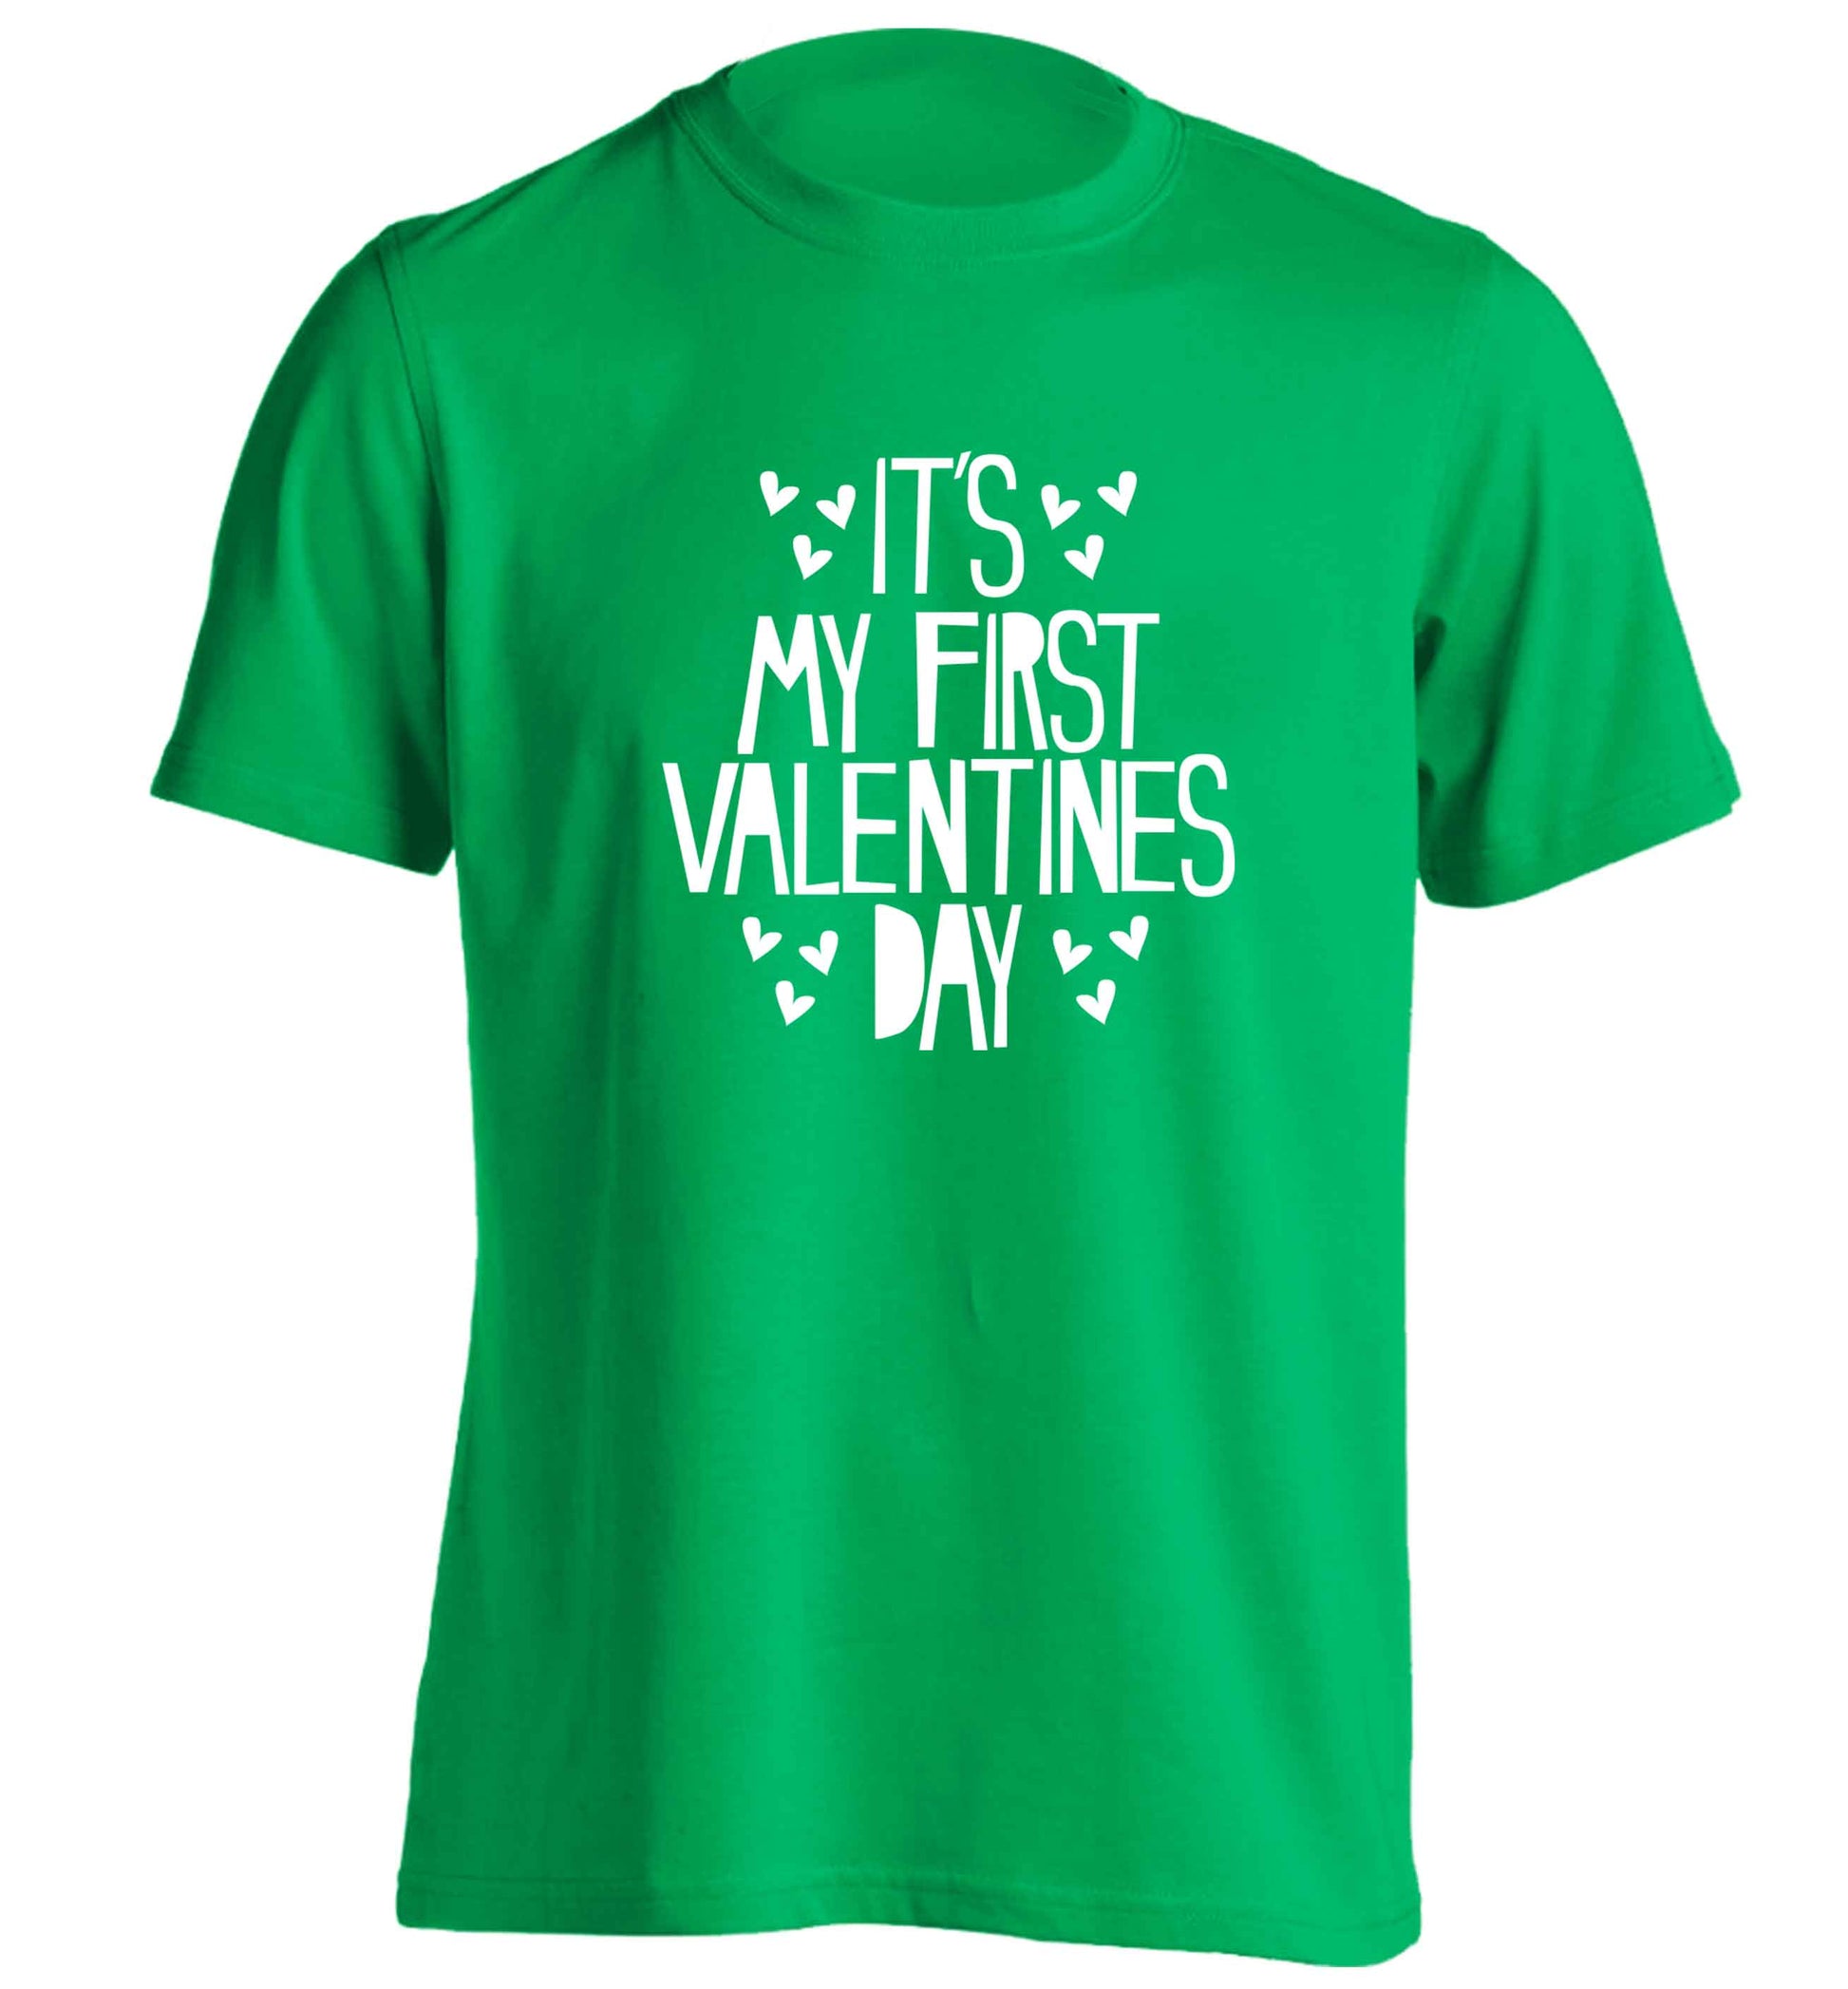 Hearts It's my First Valentine's Day adults unisex green Tshirt 2XL